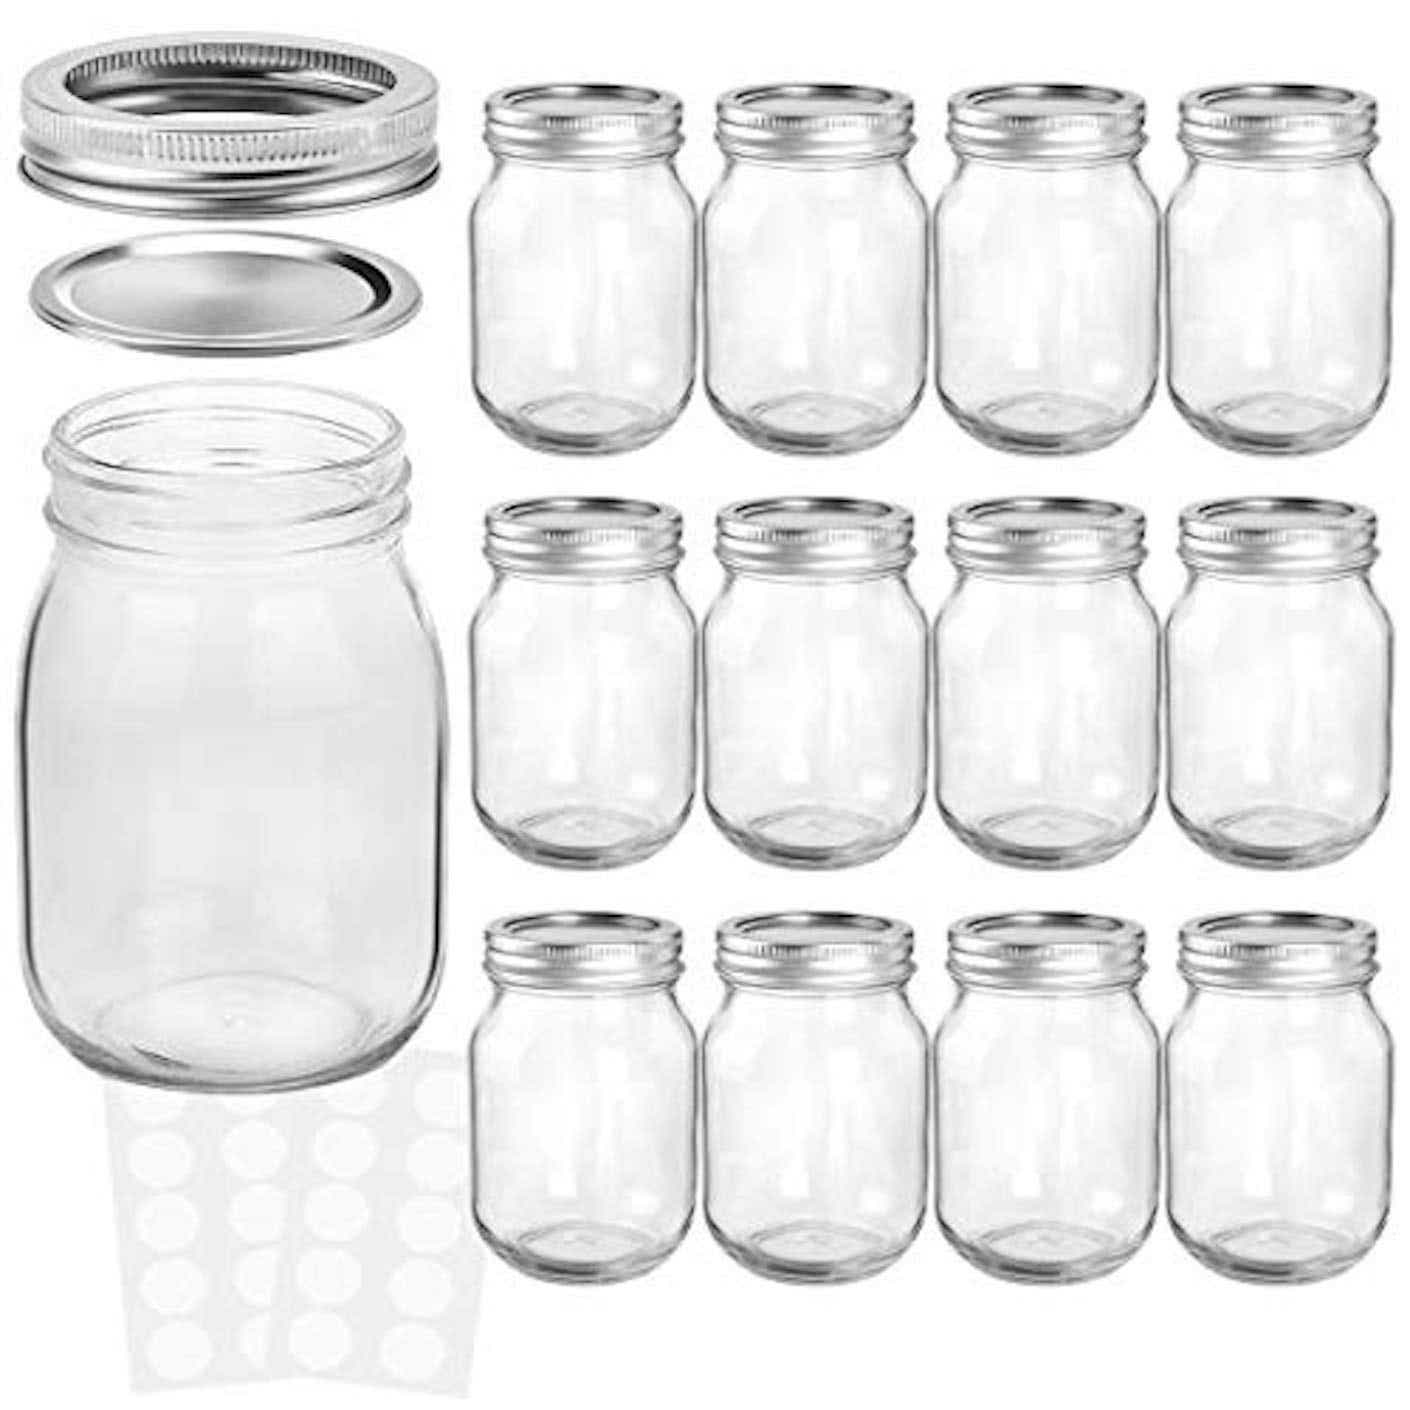 A set of clear mason jars with silver lids pictured in front of a white background.